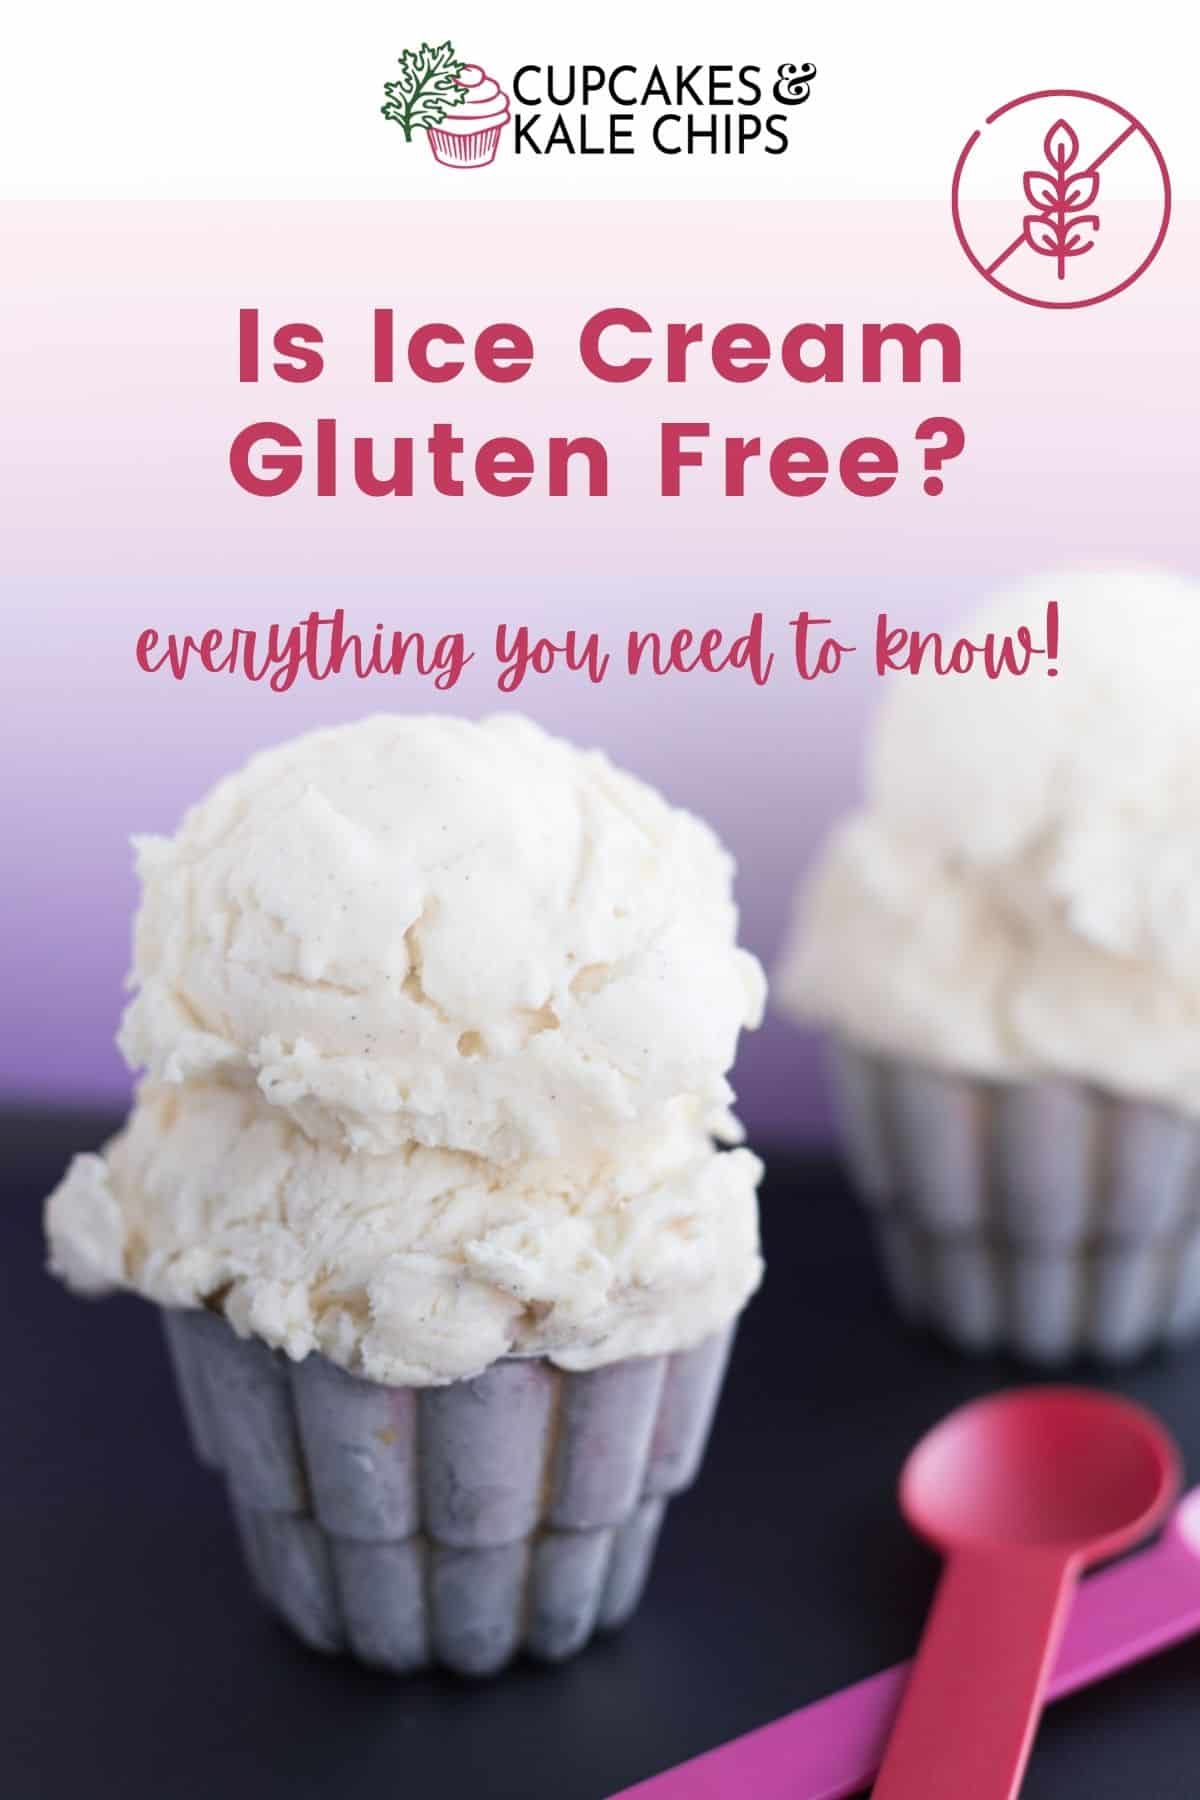 Is Ice Cream Gluten Free? | Cupcakes & Kale Chips